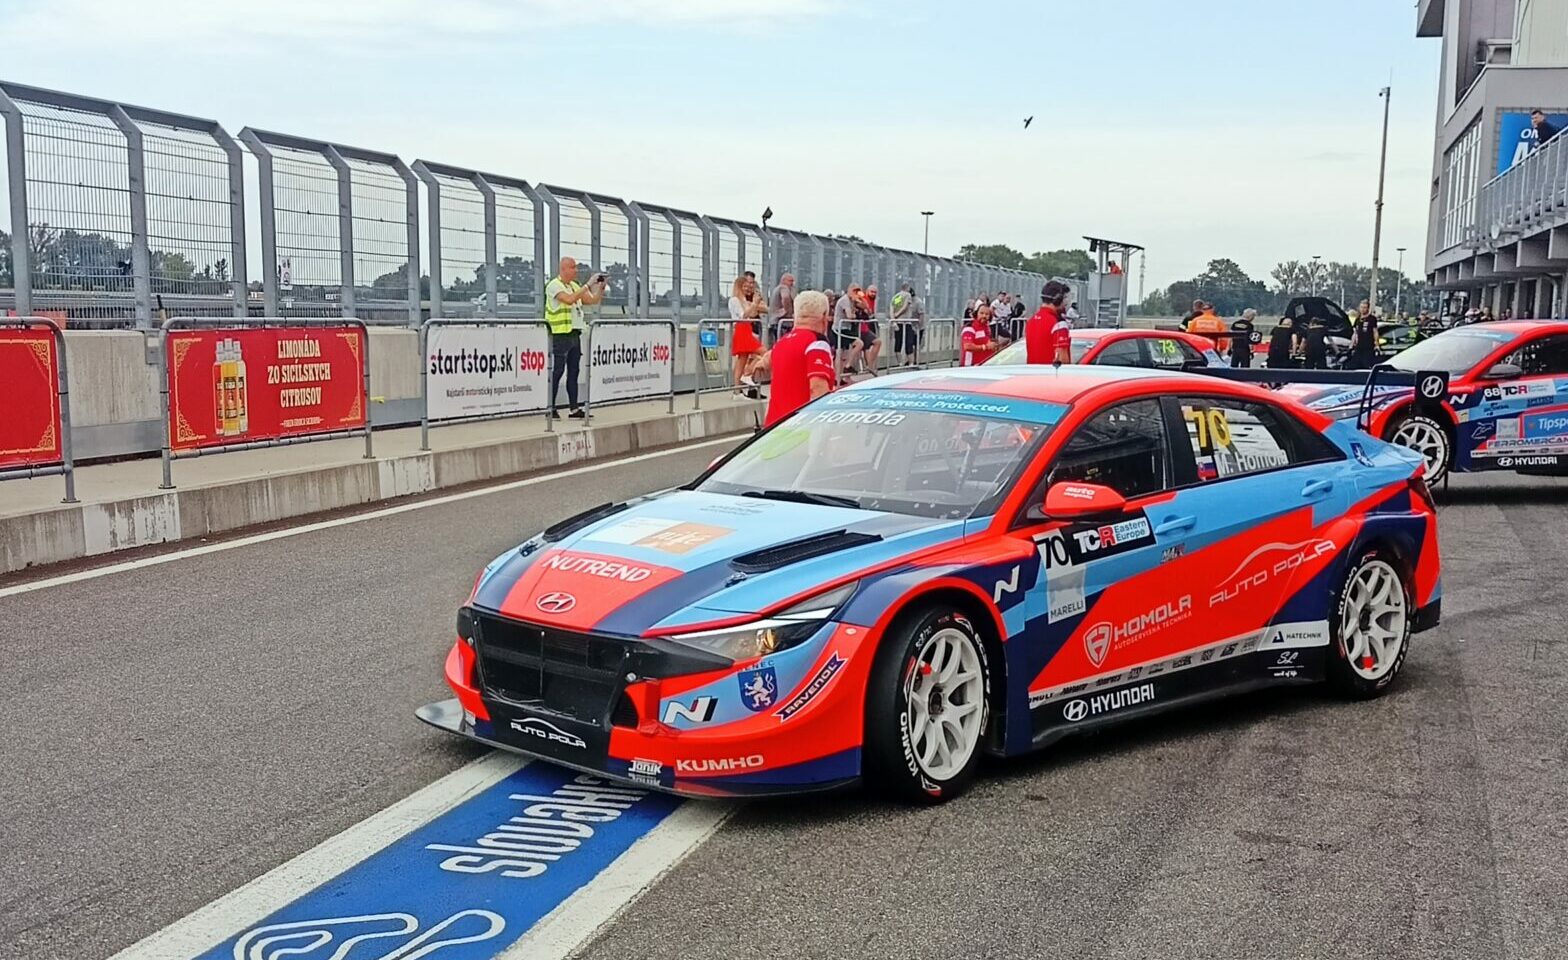 Maťo Homola leads from start to finish at Slovakia Ring